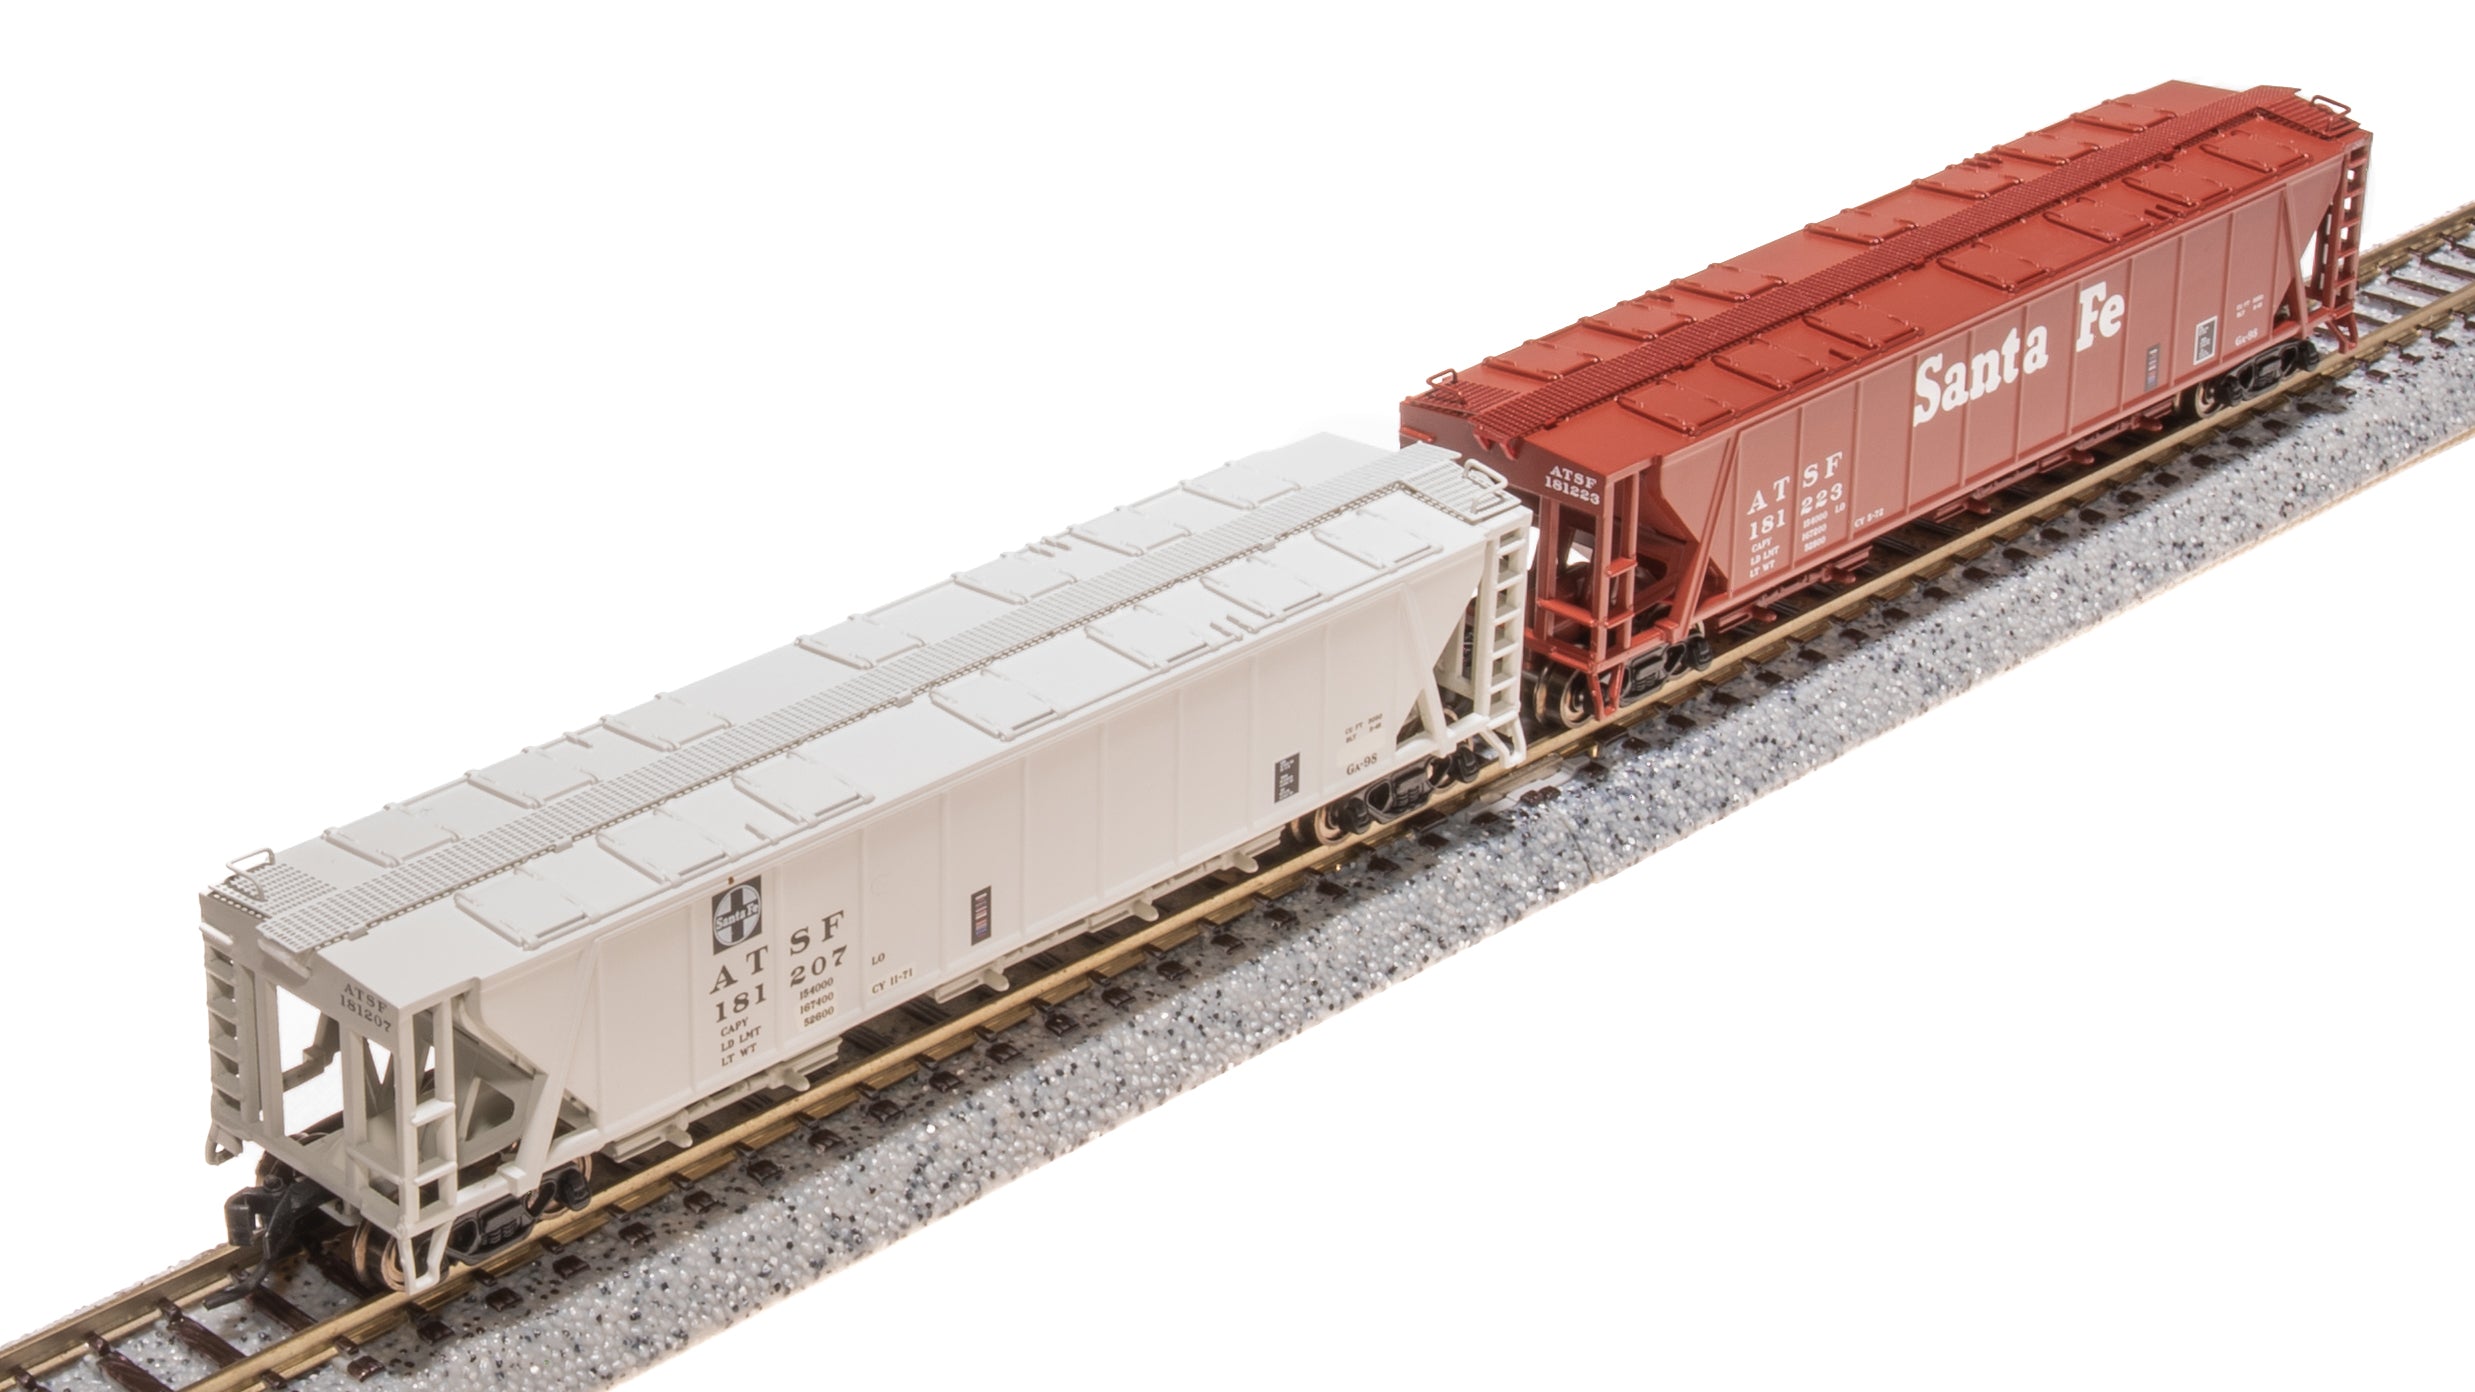 7258 H32 Covered Hopper, ATSF, Variety 2-pack, N Scale (Fantasy Paint Scheme) Default Title